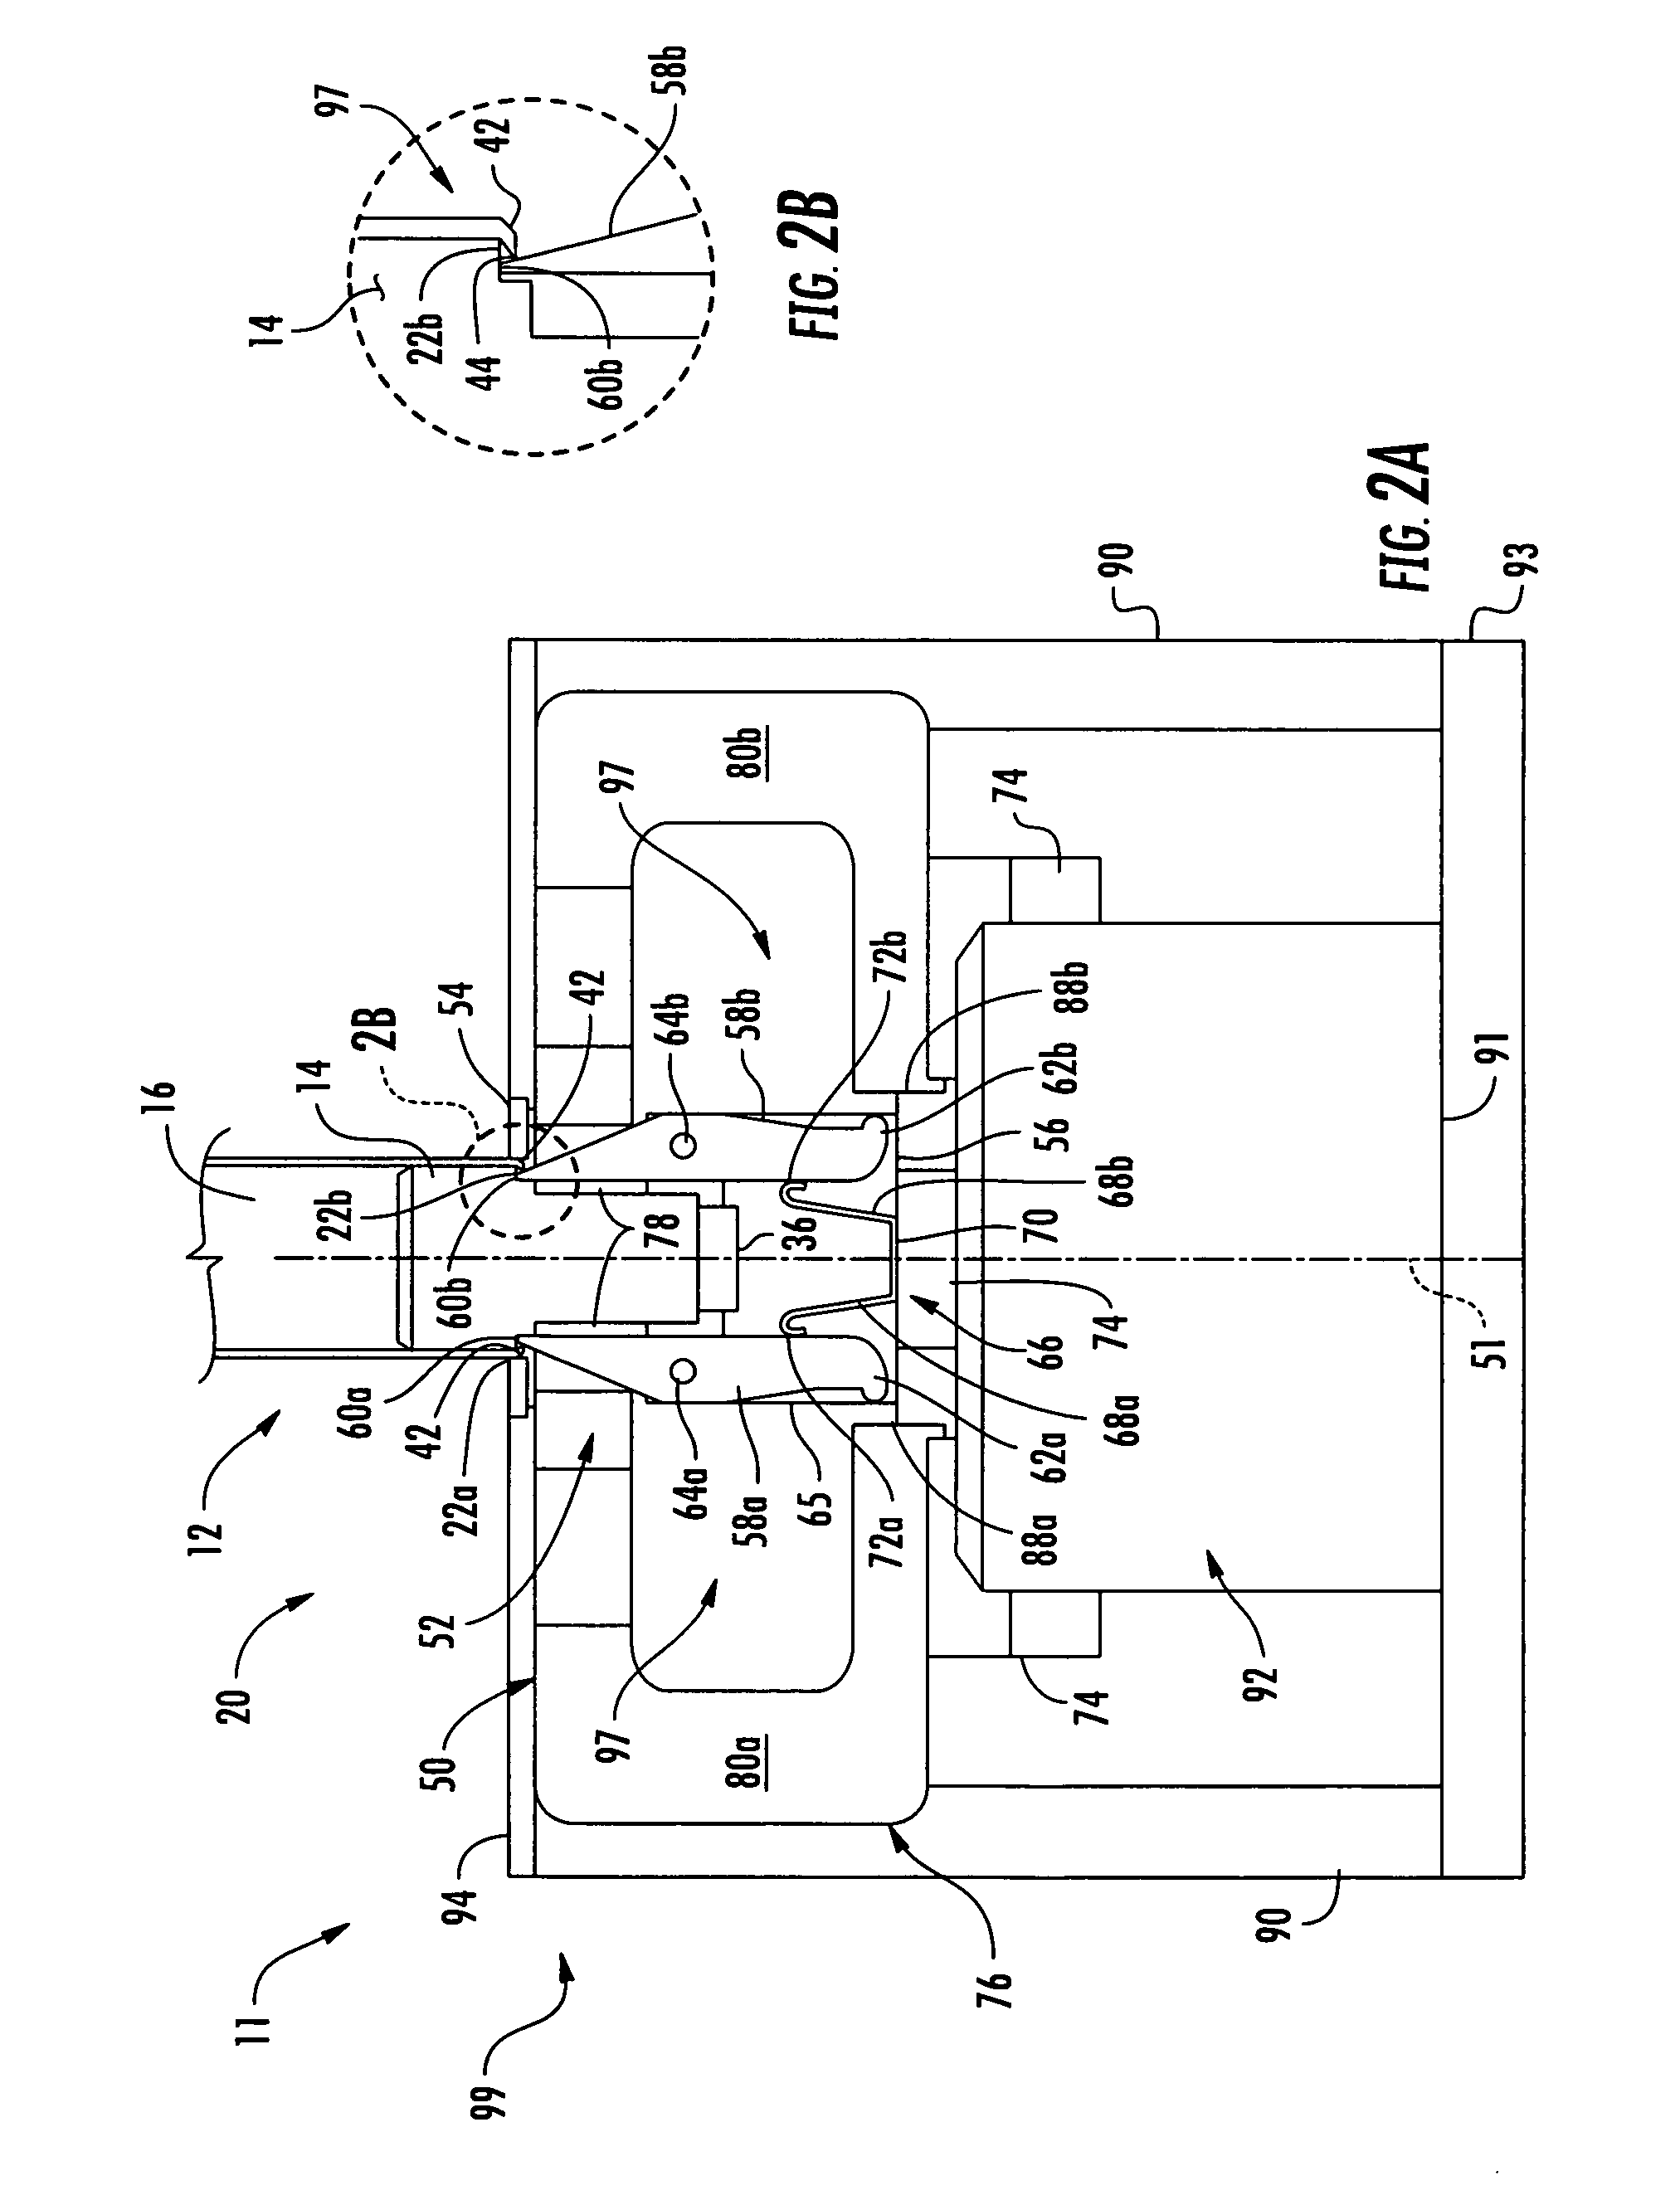 Methods and devices for remanufacturing printer cartridge components